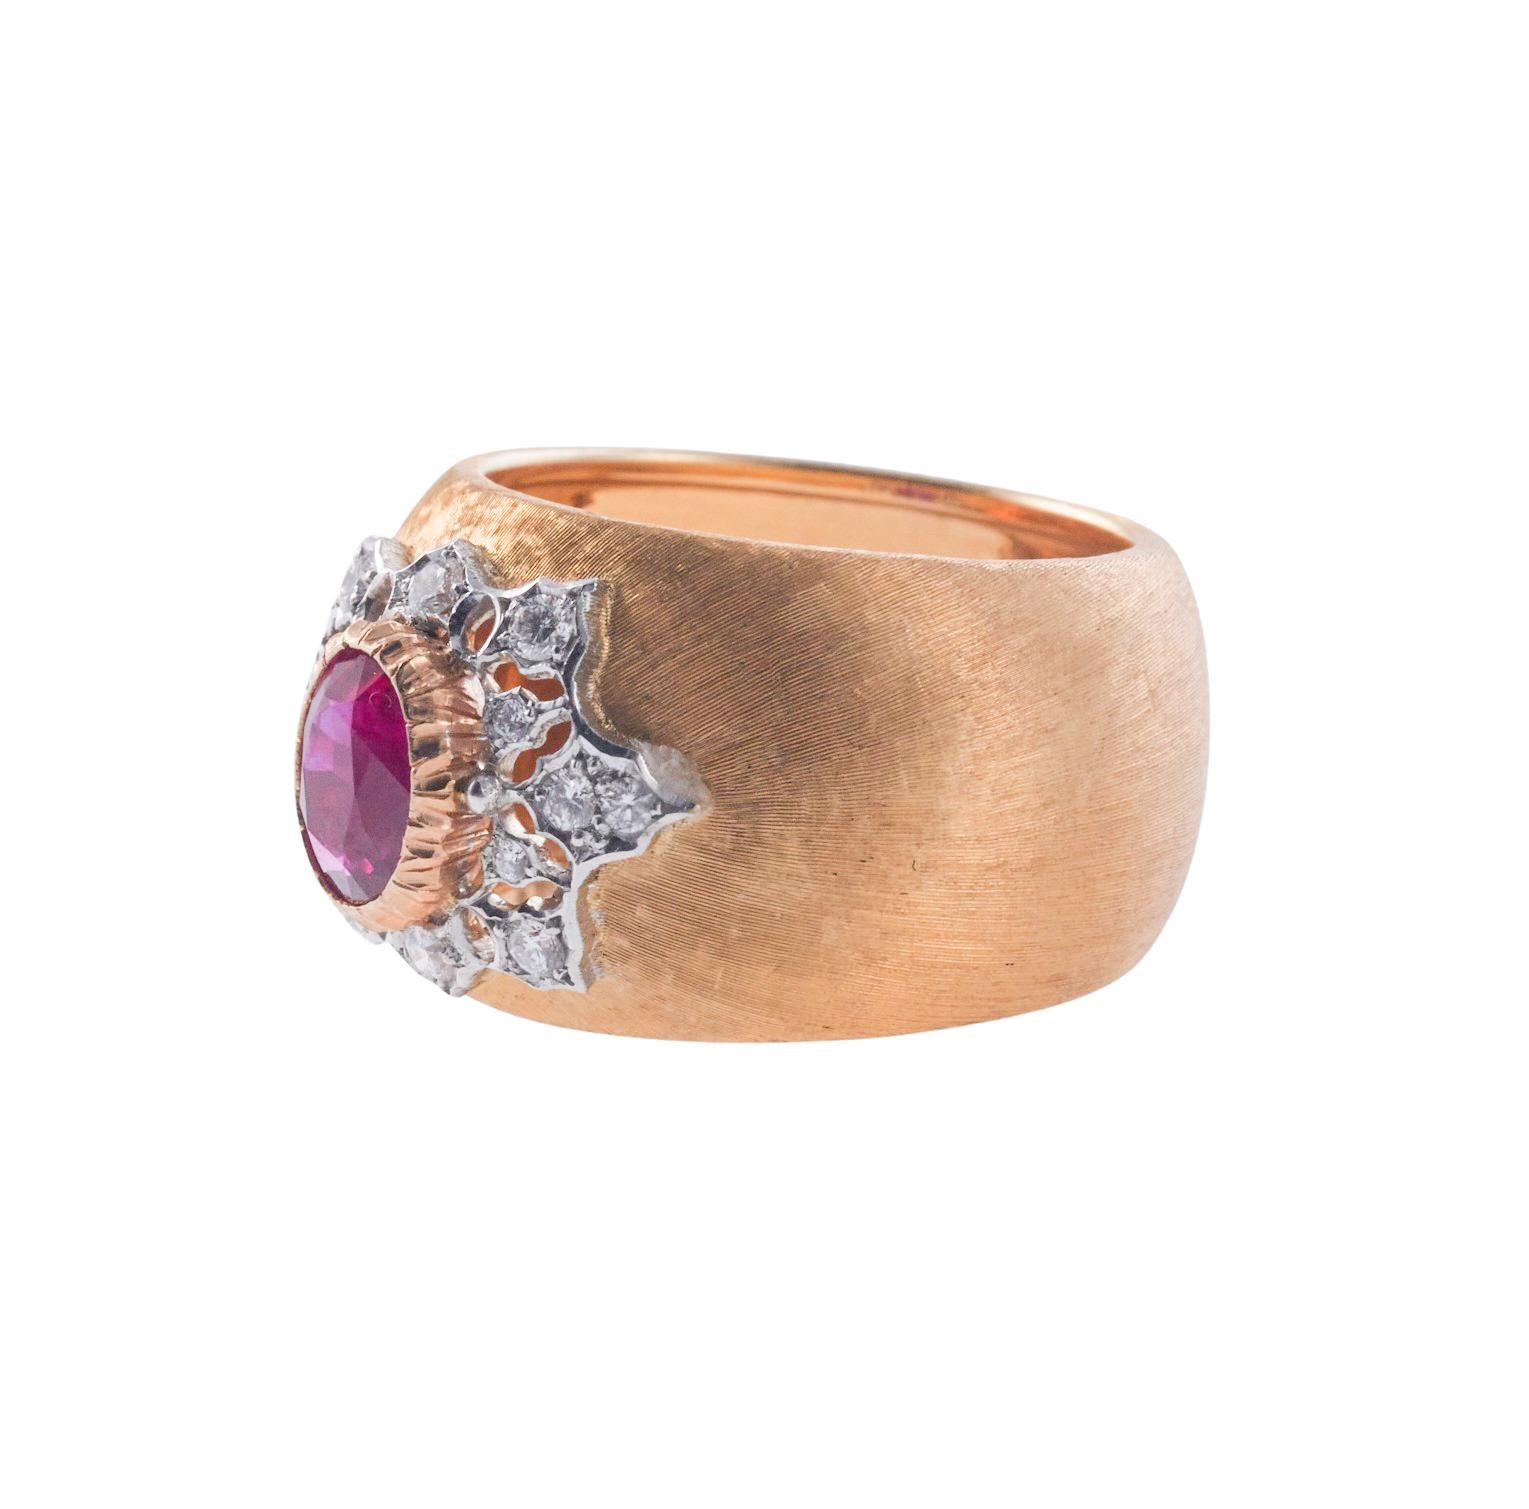 18k rose gold, Buccellati band ring, set with center certified 1.05ct Burma ruby, surrounded by approx. 0.14ctw in diamonds. Ring size is 6, top measures 13.5mm wide. Marked: Buccellati, Italy, 18k. Weight is 11.9 grams. 